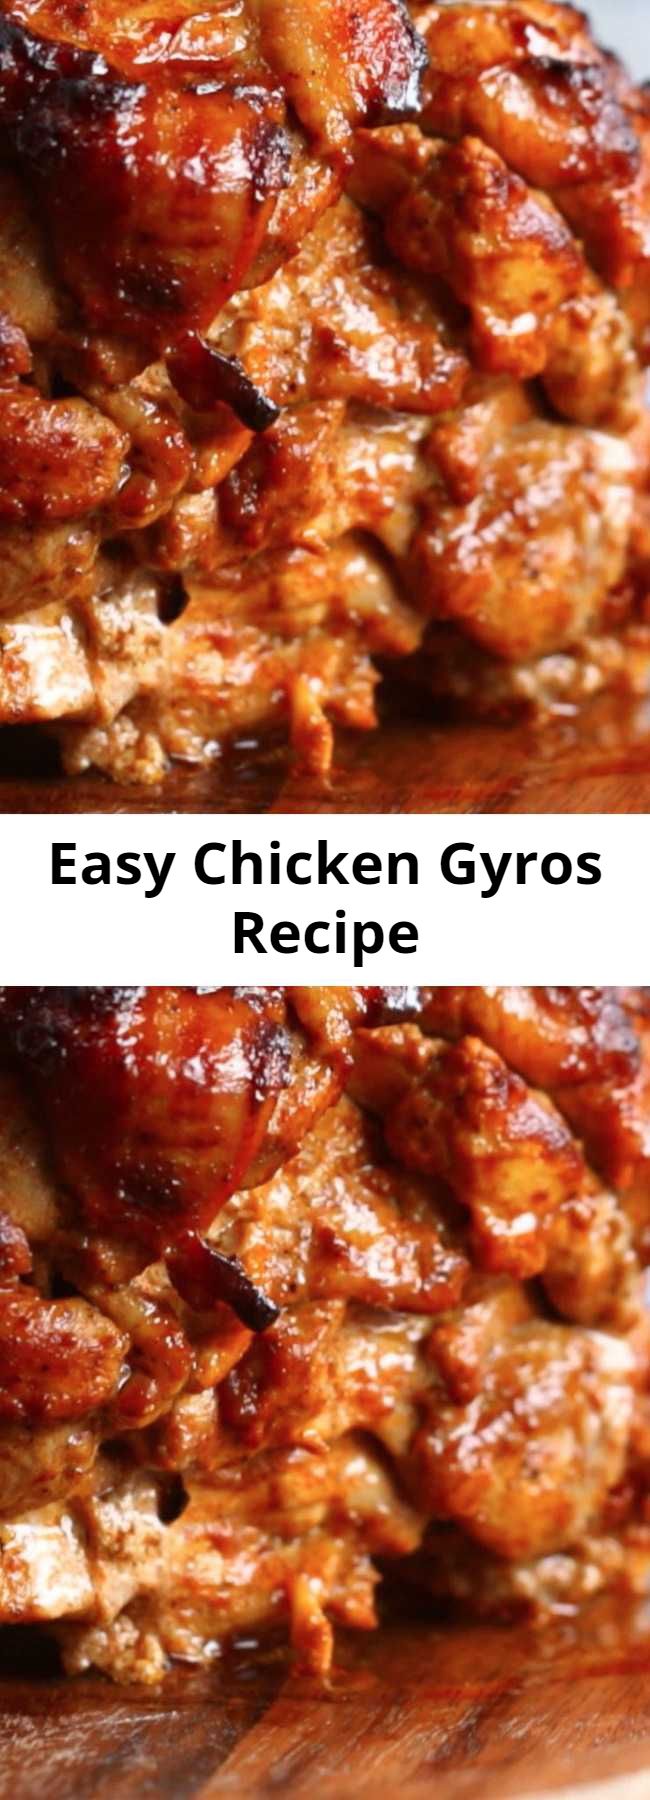 Easy Chicken Gyros Recipe - The marinade for the chicken is so sensational that I use it even when I'm not making Gyros! This is fantastic for entertaining because you can just lay it all out for guests to help themselves. The smell when the chicken is cooking is incredible - you can really smell the oregano and garlic!